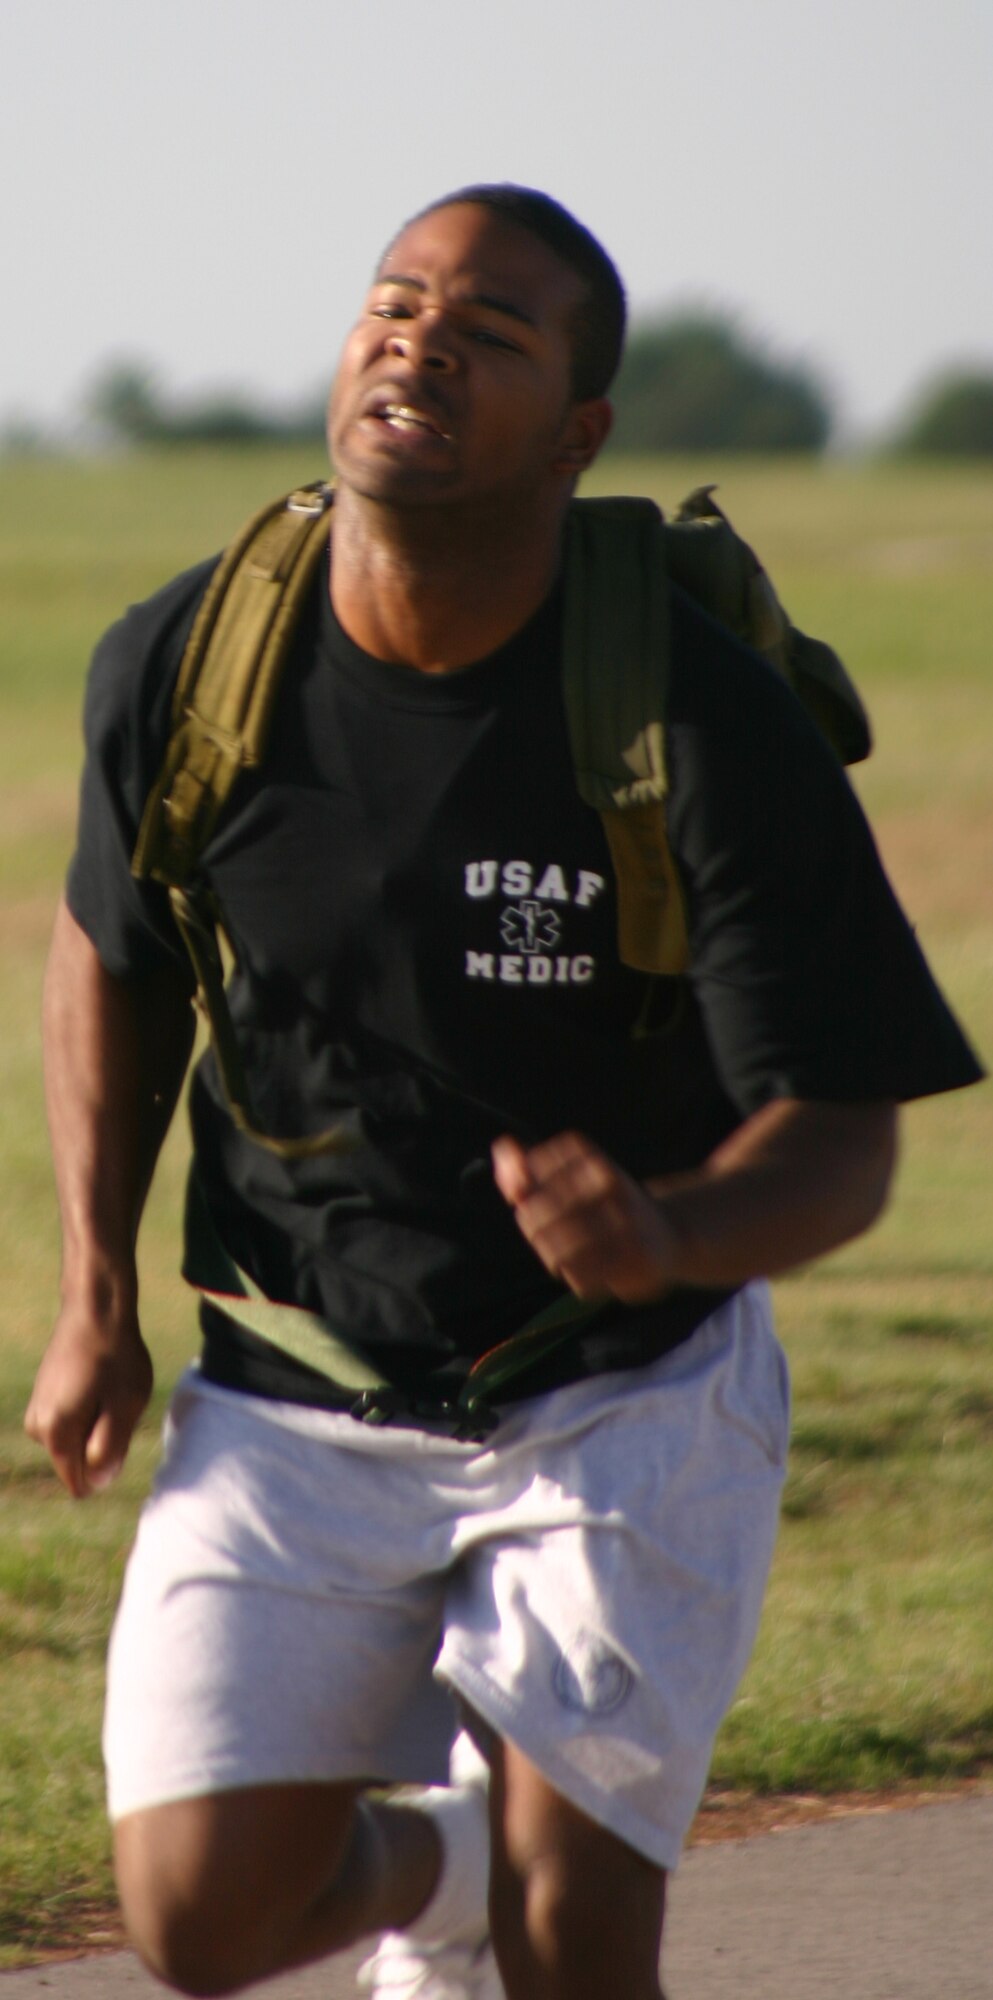 Marcus Pender from the 383rd Training Squadron participates in the rucksack relay Saturday. Pender, along with other participants, ran the relay carrying a rucksack filled with 30 pounds of sand. (U.S. Air Force photo/Airman Jacob Corbin).